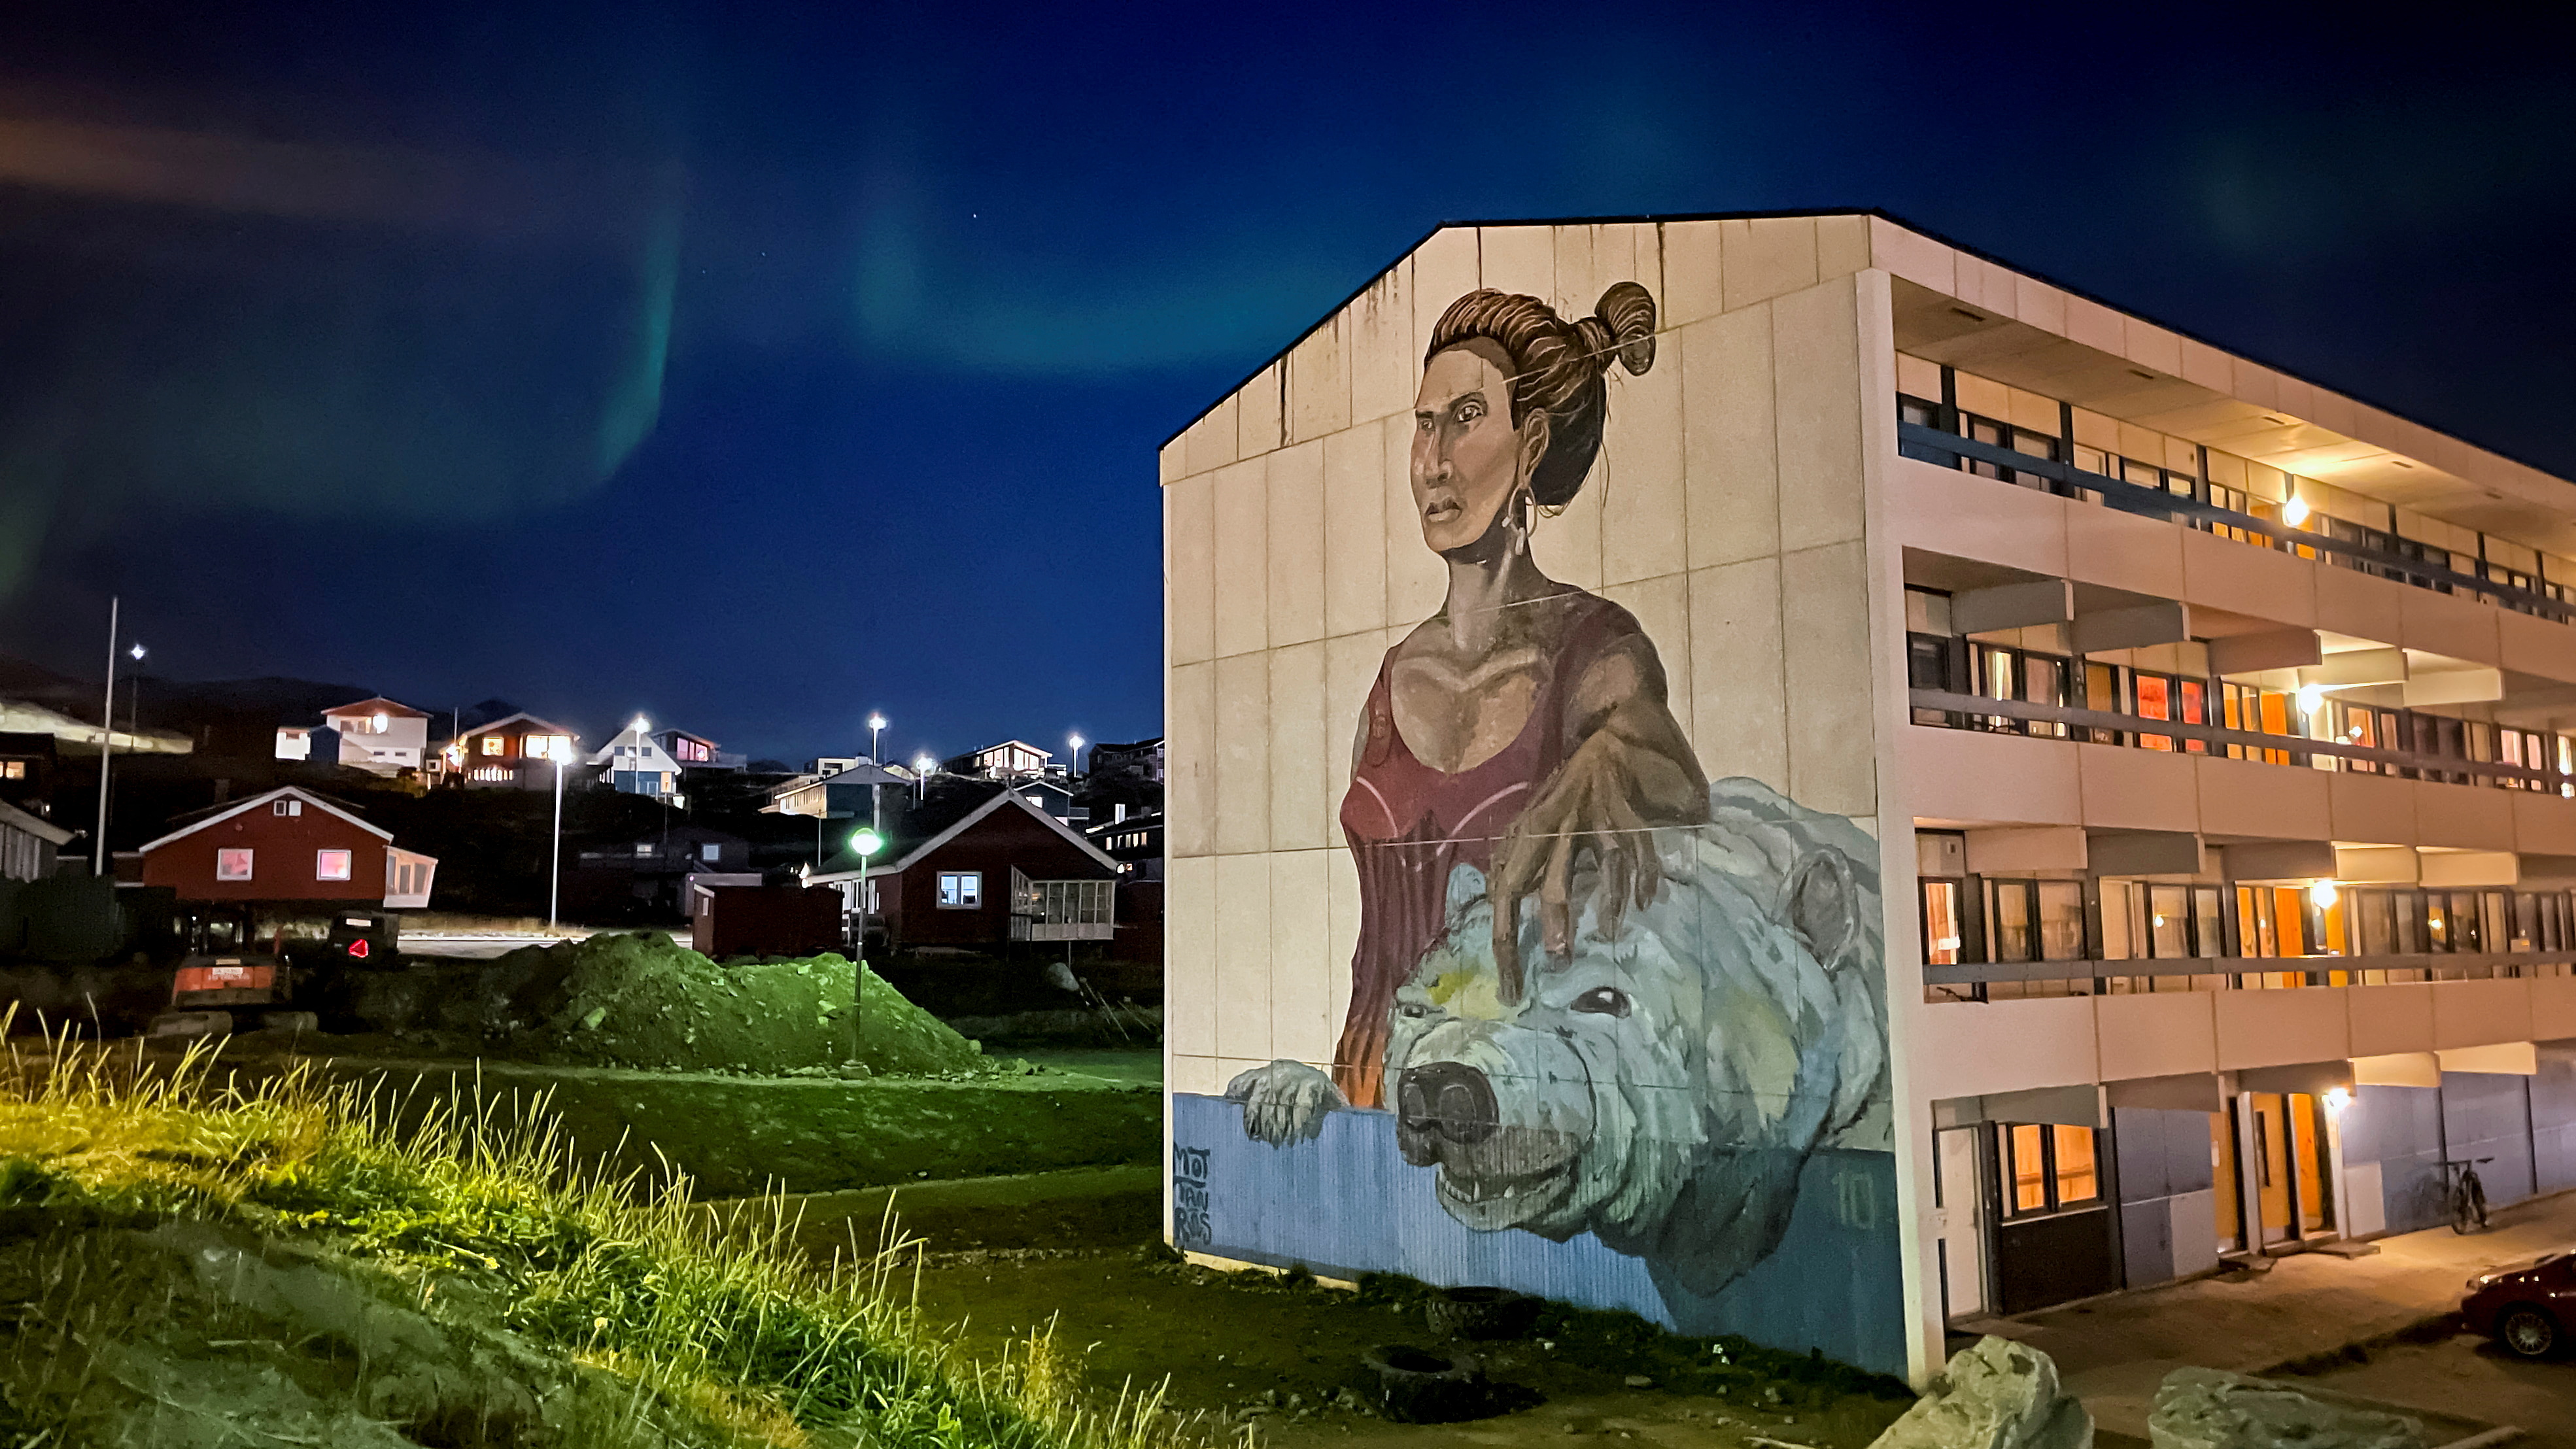 The Aurora Borealis (Northern Lights) is seen behind a building with social housings with a mural in Nuuk, Greenland, September 17, 2021.